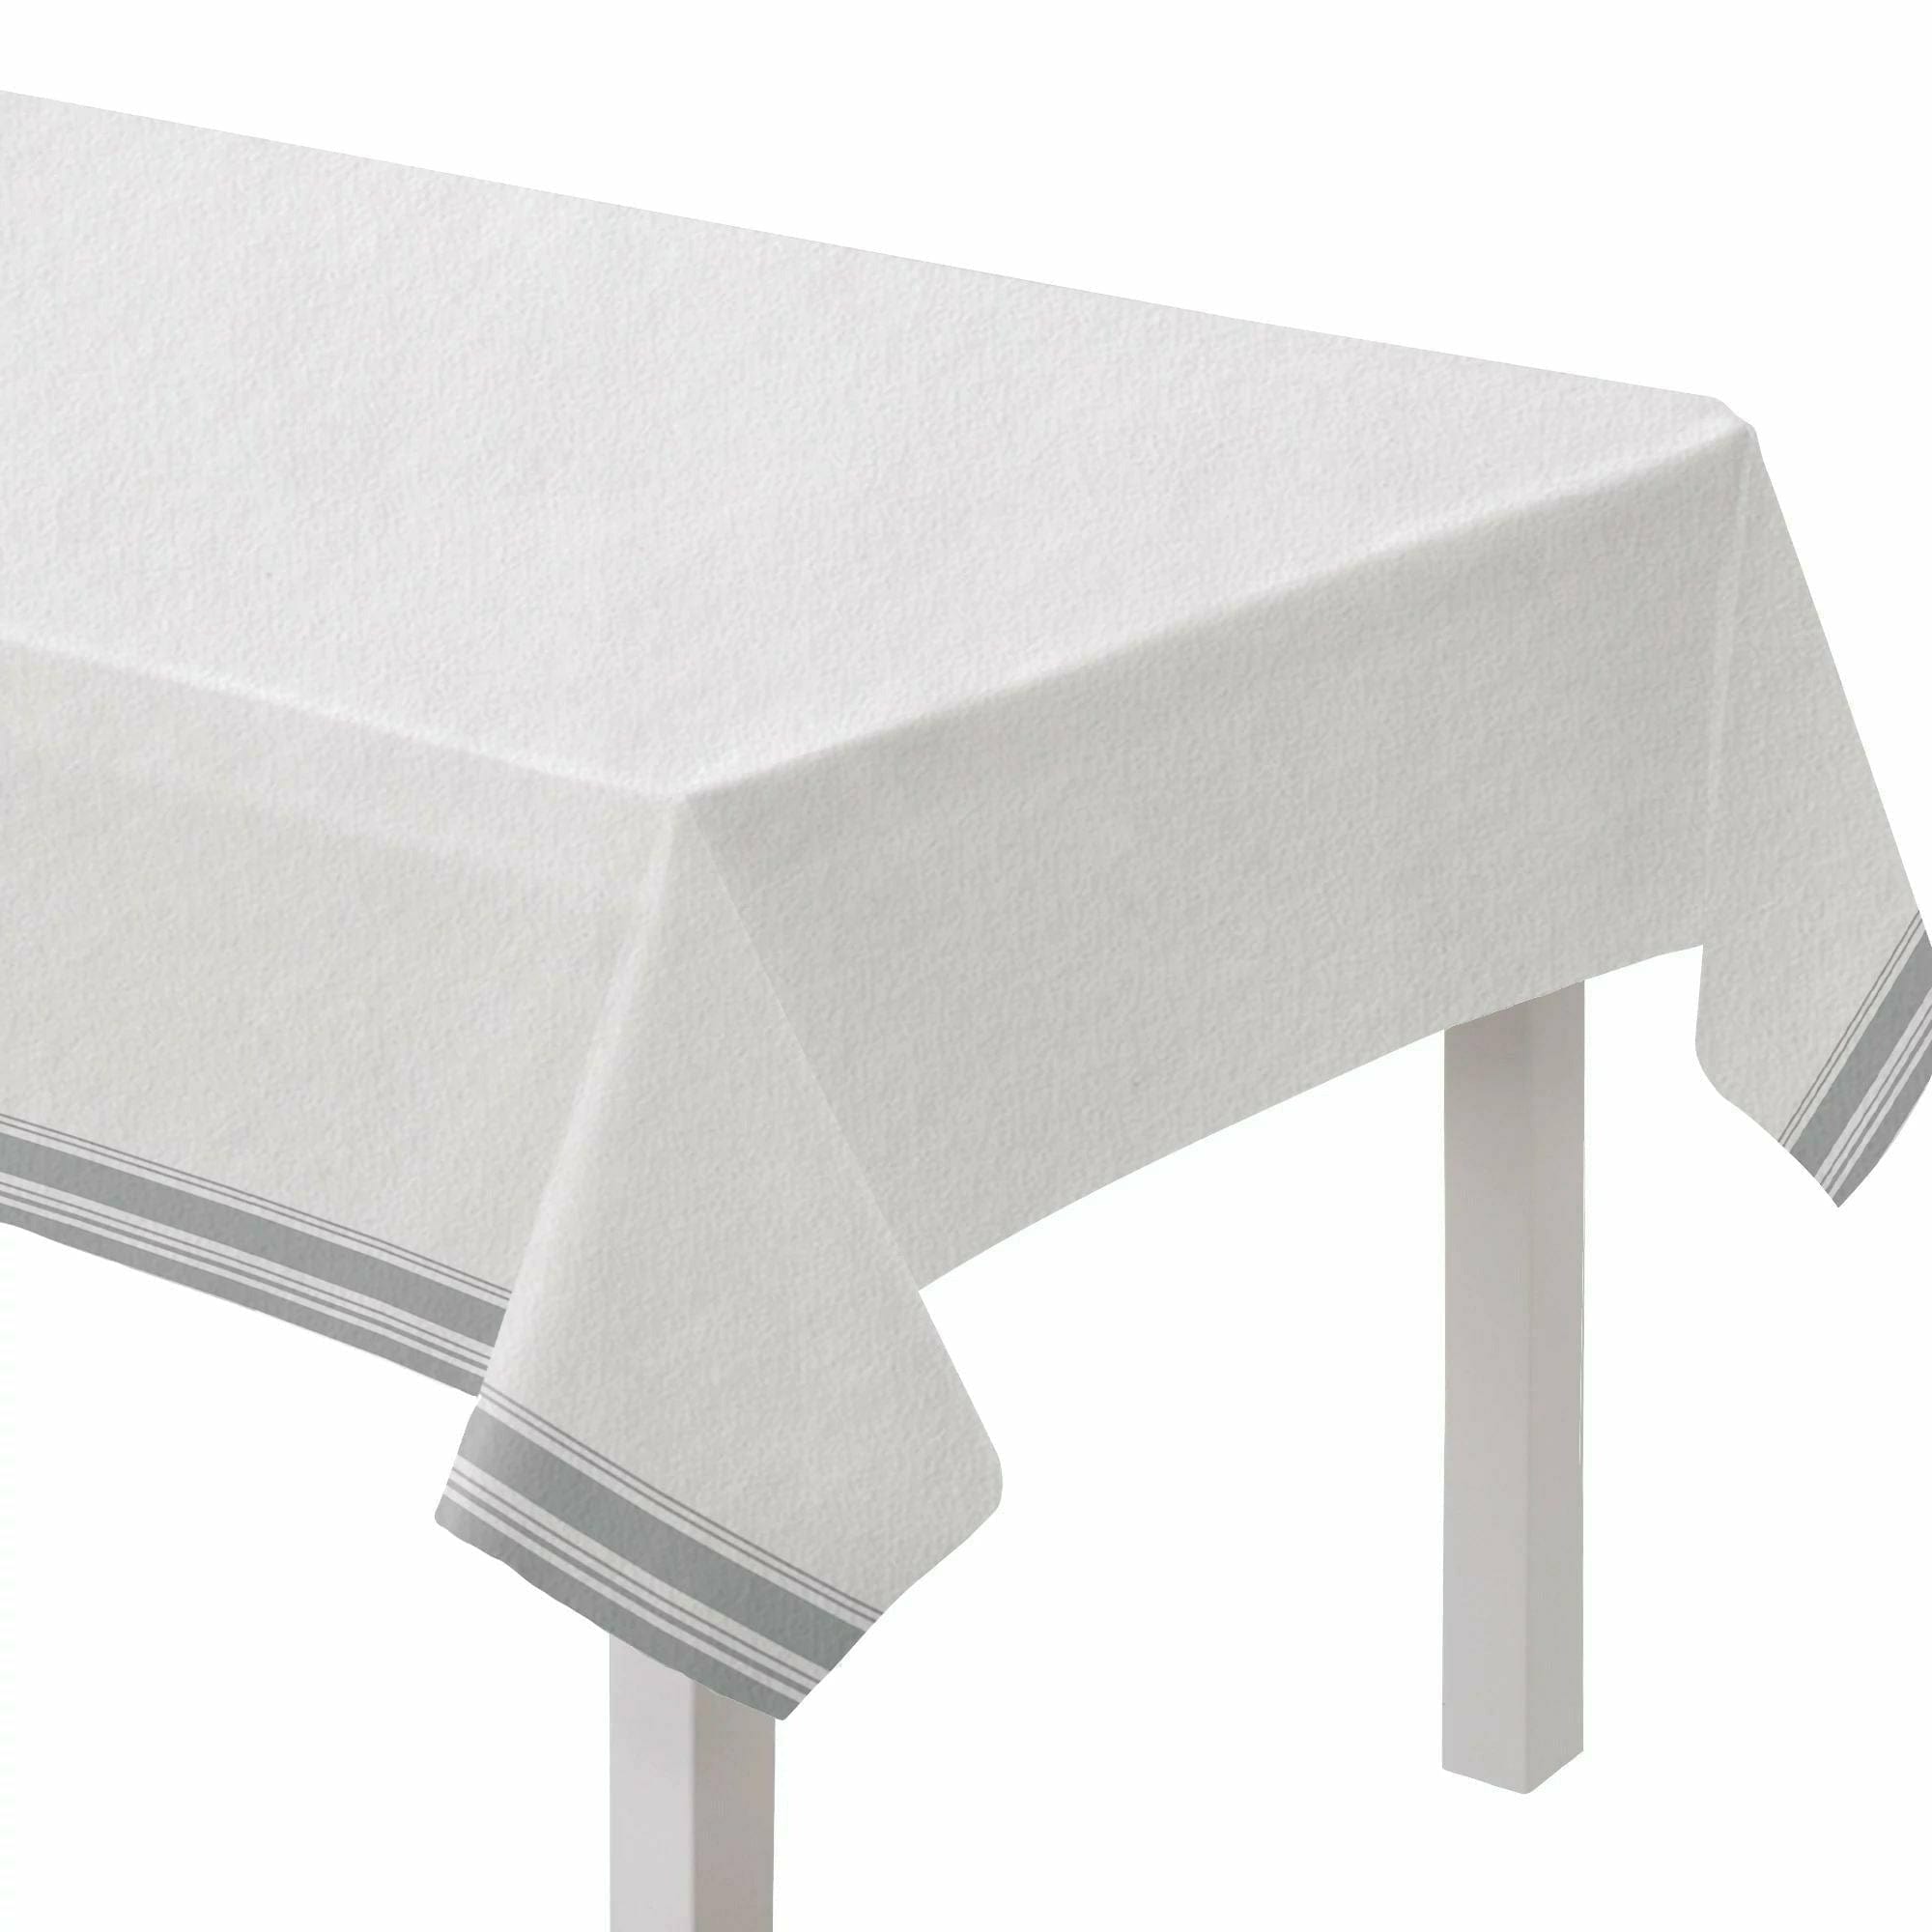 Amscan BASIC Airlaid Table Cover - Silver